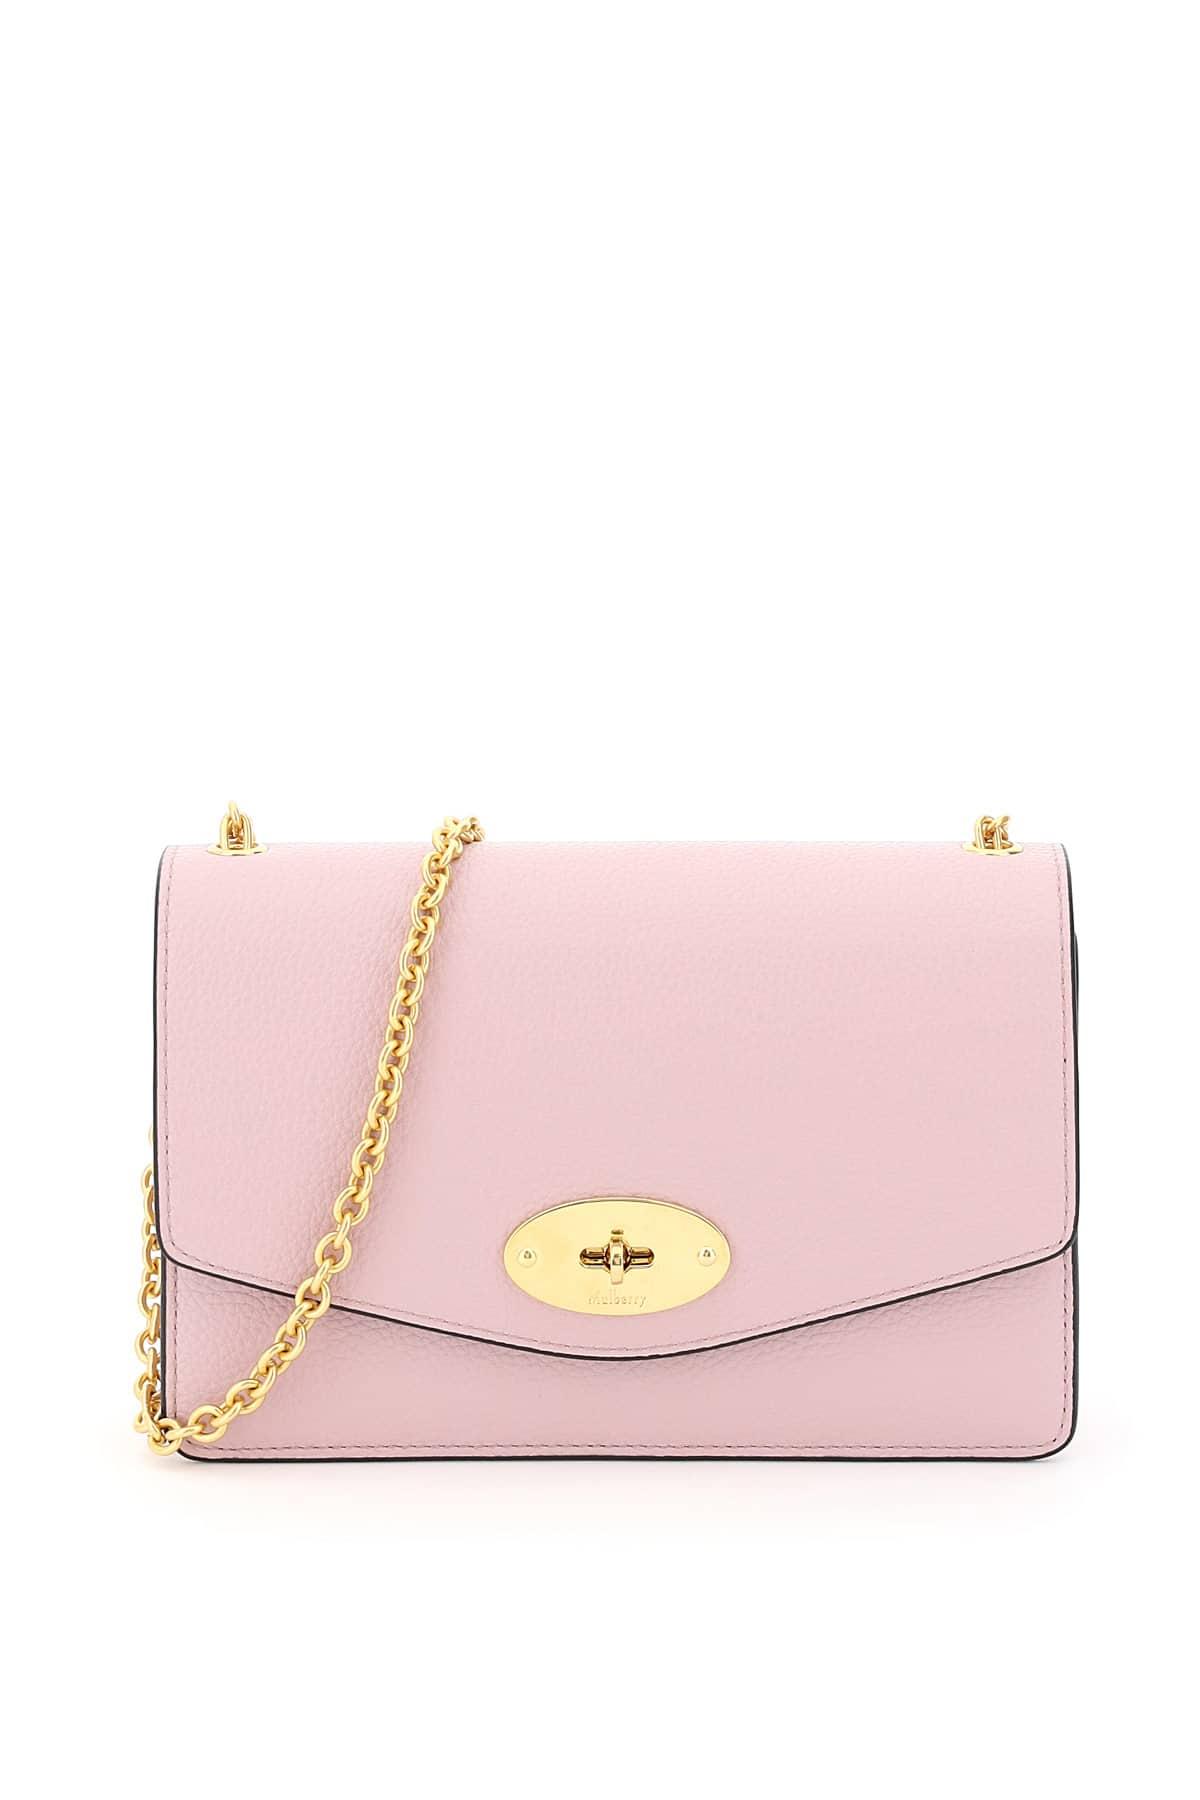 Mulberry Grain Leather Small Darley Bag in Pink - Lyst